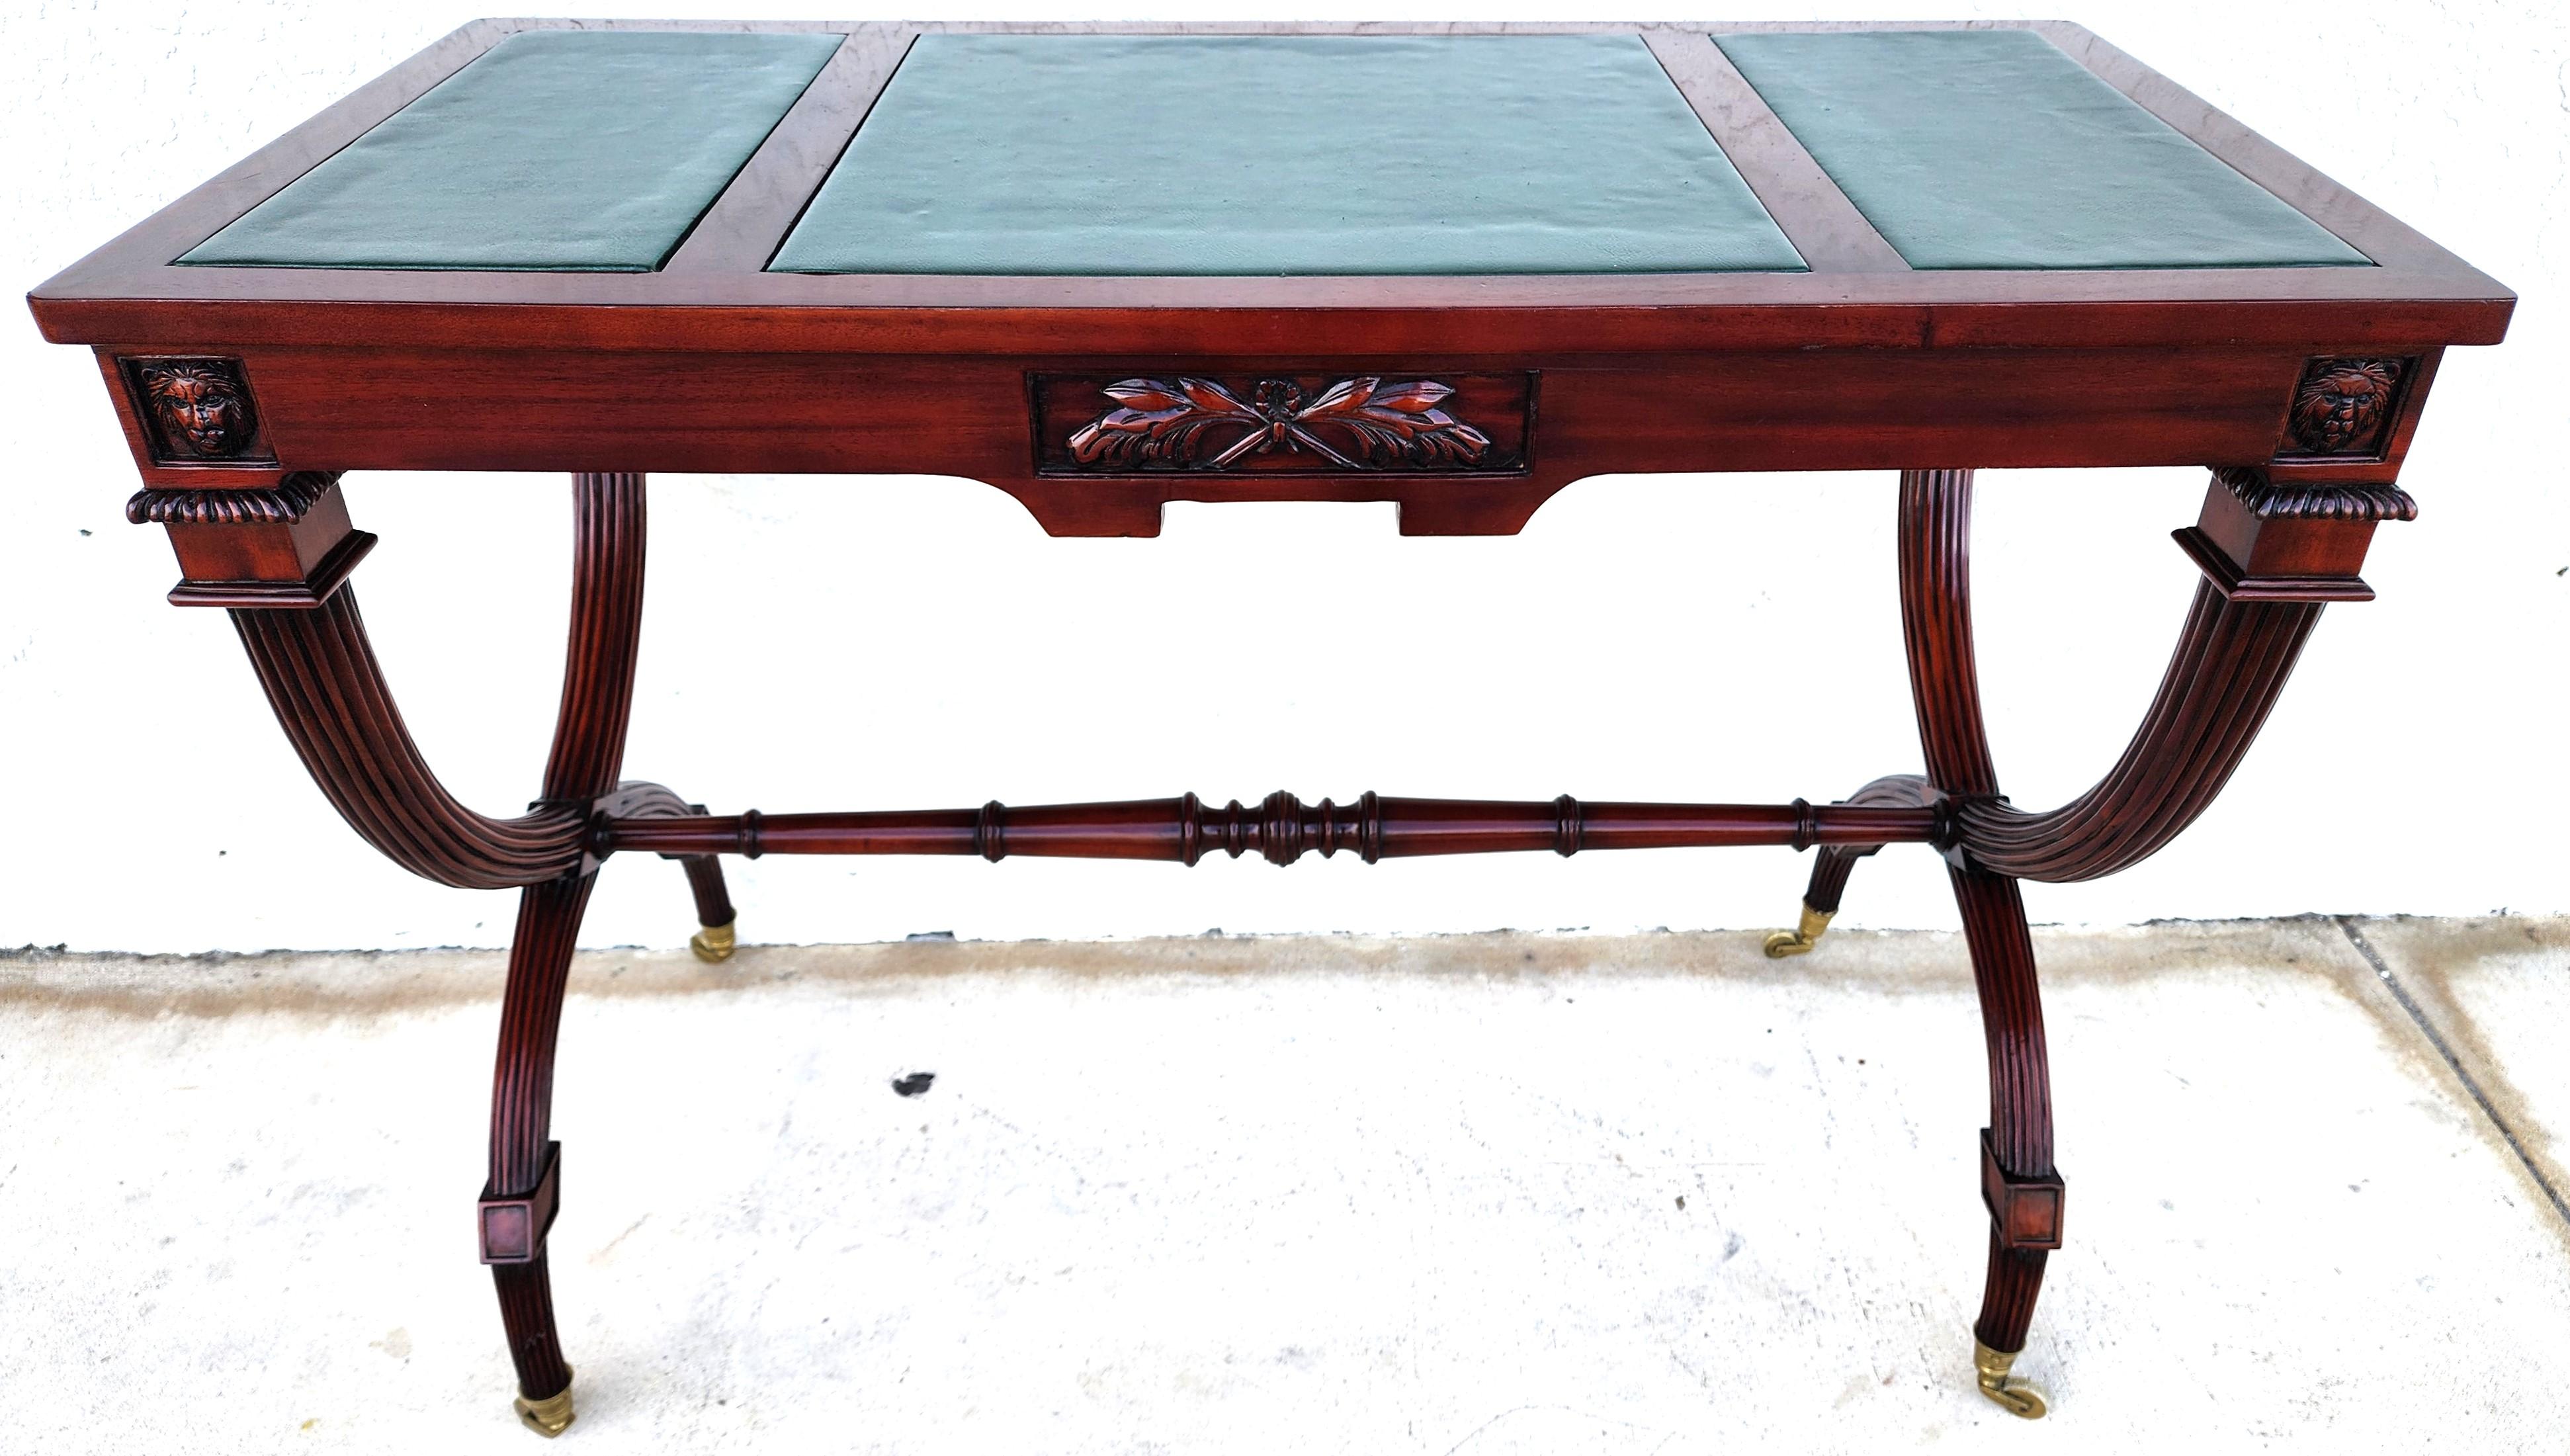 For FULL item description click on CONTINUE READING at the bottom of this page.

Offering One Of Our Recent Palm Beach Estate Fine Furniture Acquisitions Of A
English Rolling Console Table Charles X Style with Brass Casters
Top is either leather or